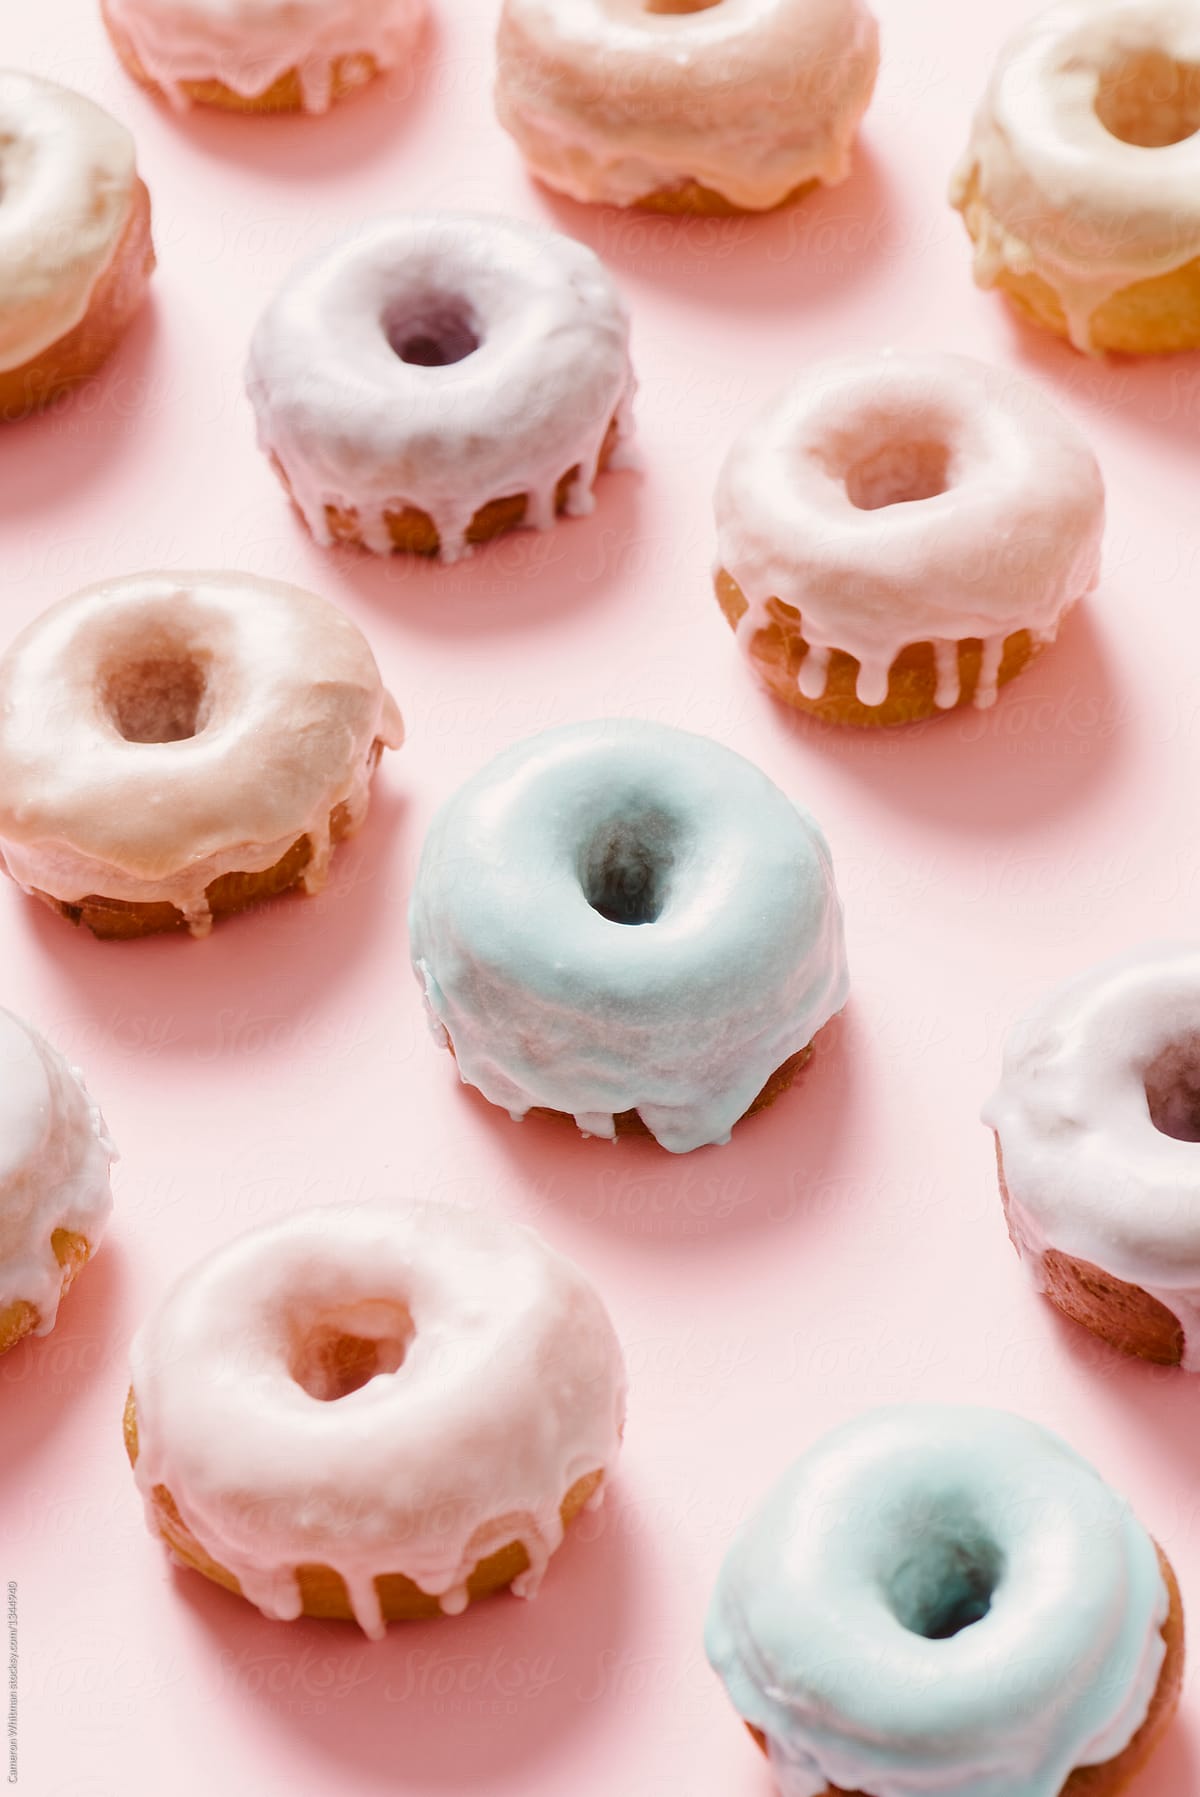 Pastel Colored Glazed Donuts